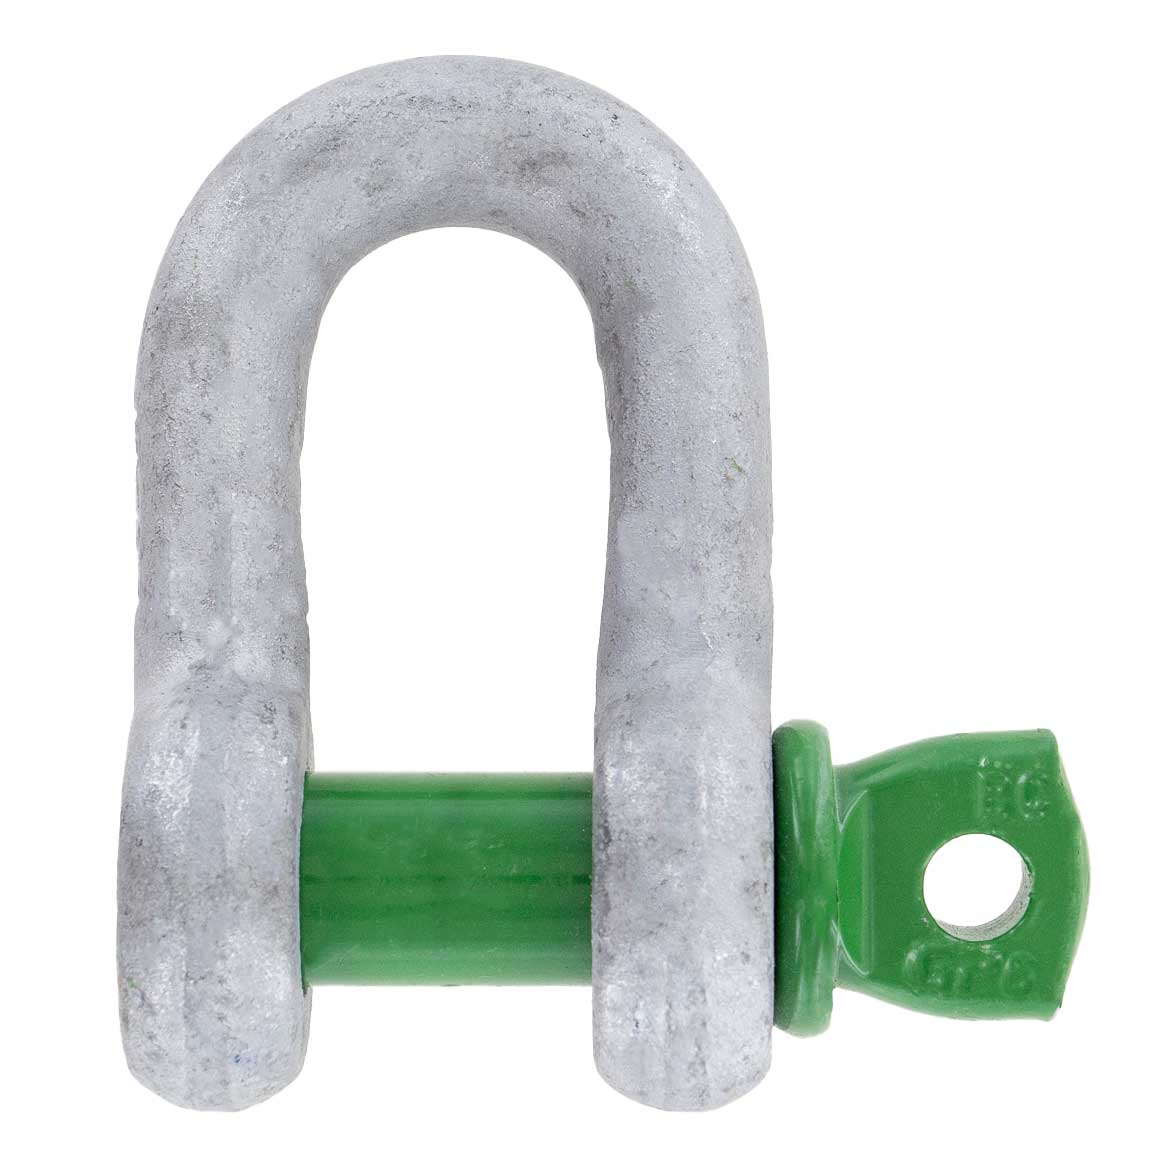 1-3/4" Van Beest Green Pin® Screw Pin Chain Shackle | G-4151 - 25 Ton primary image